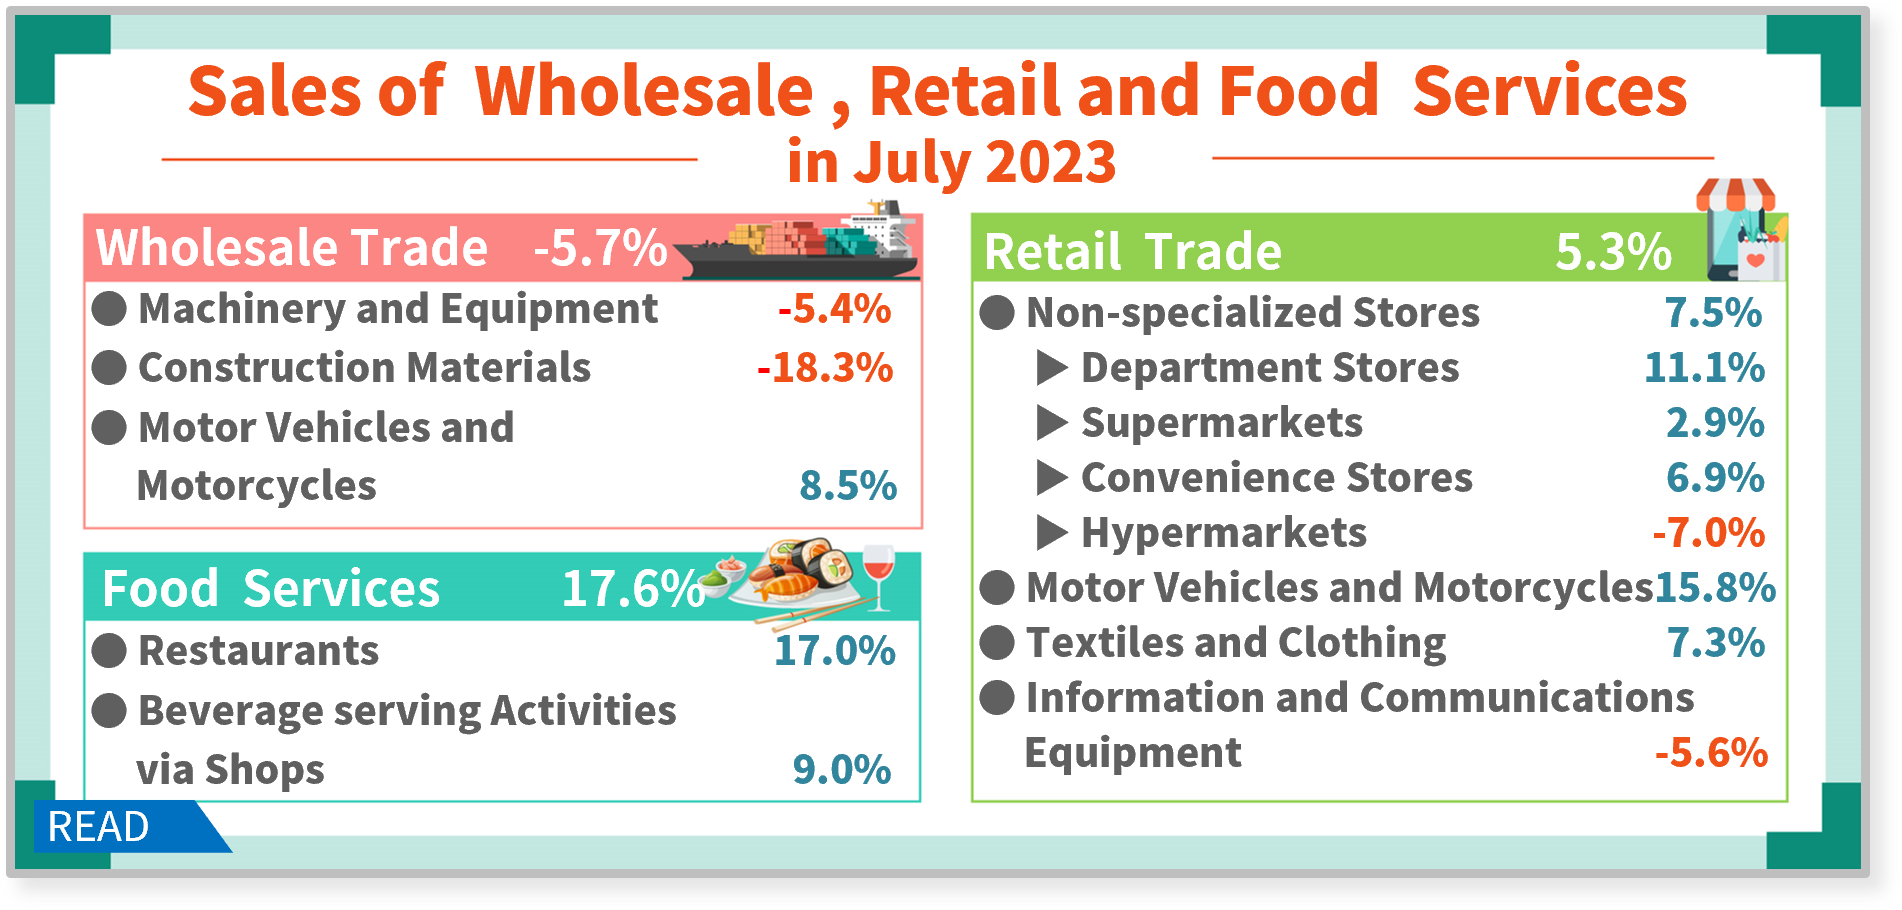 Sales of Wholesale, Retail and Food Services in July 2023